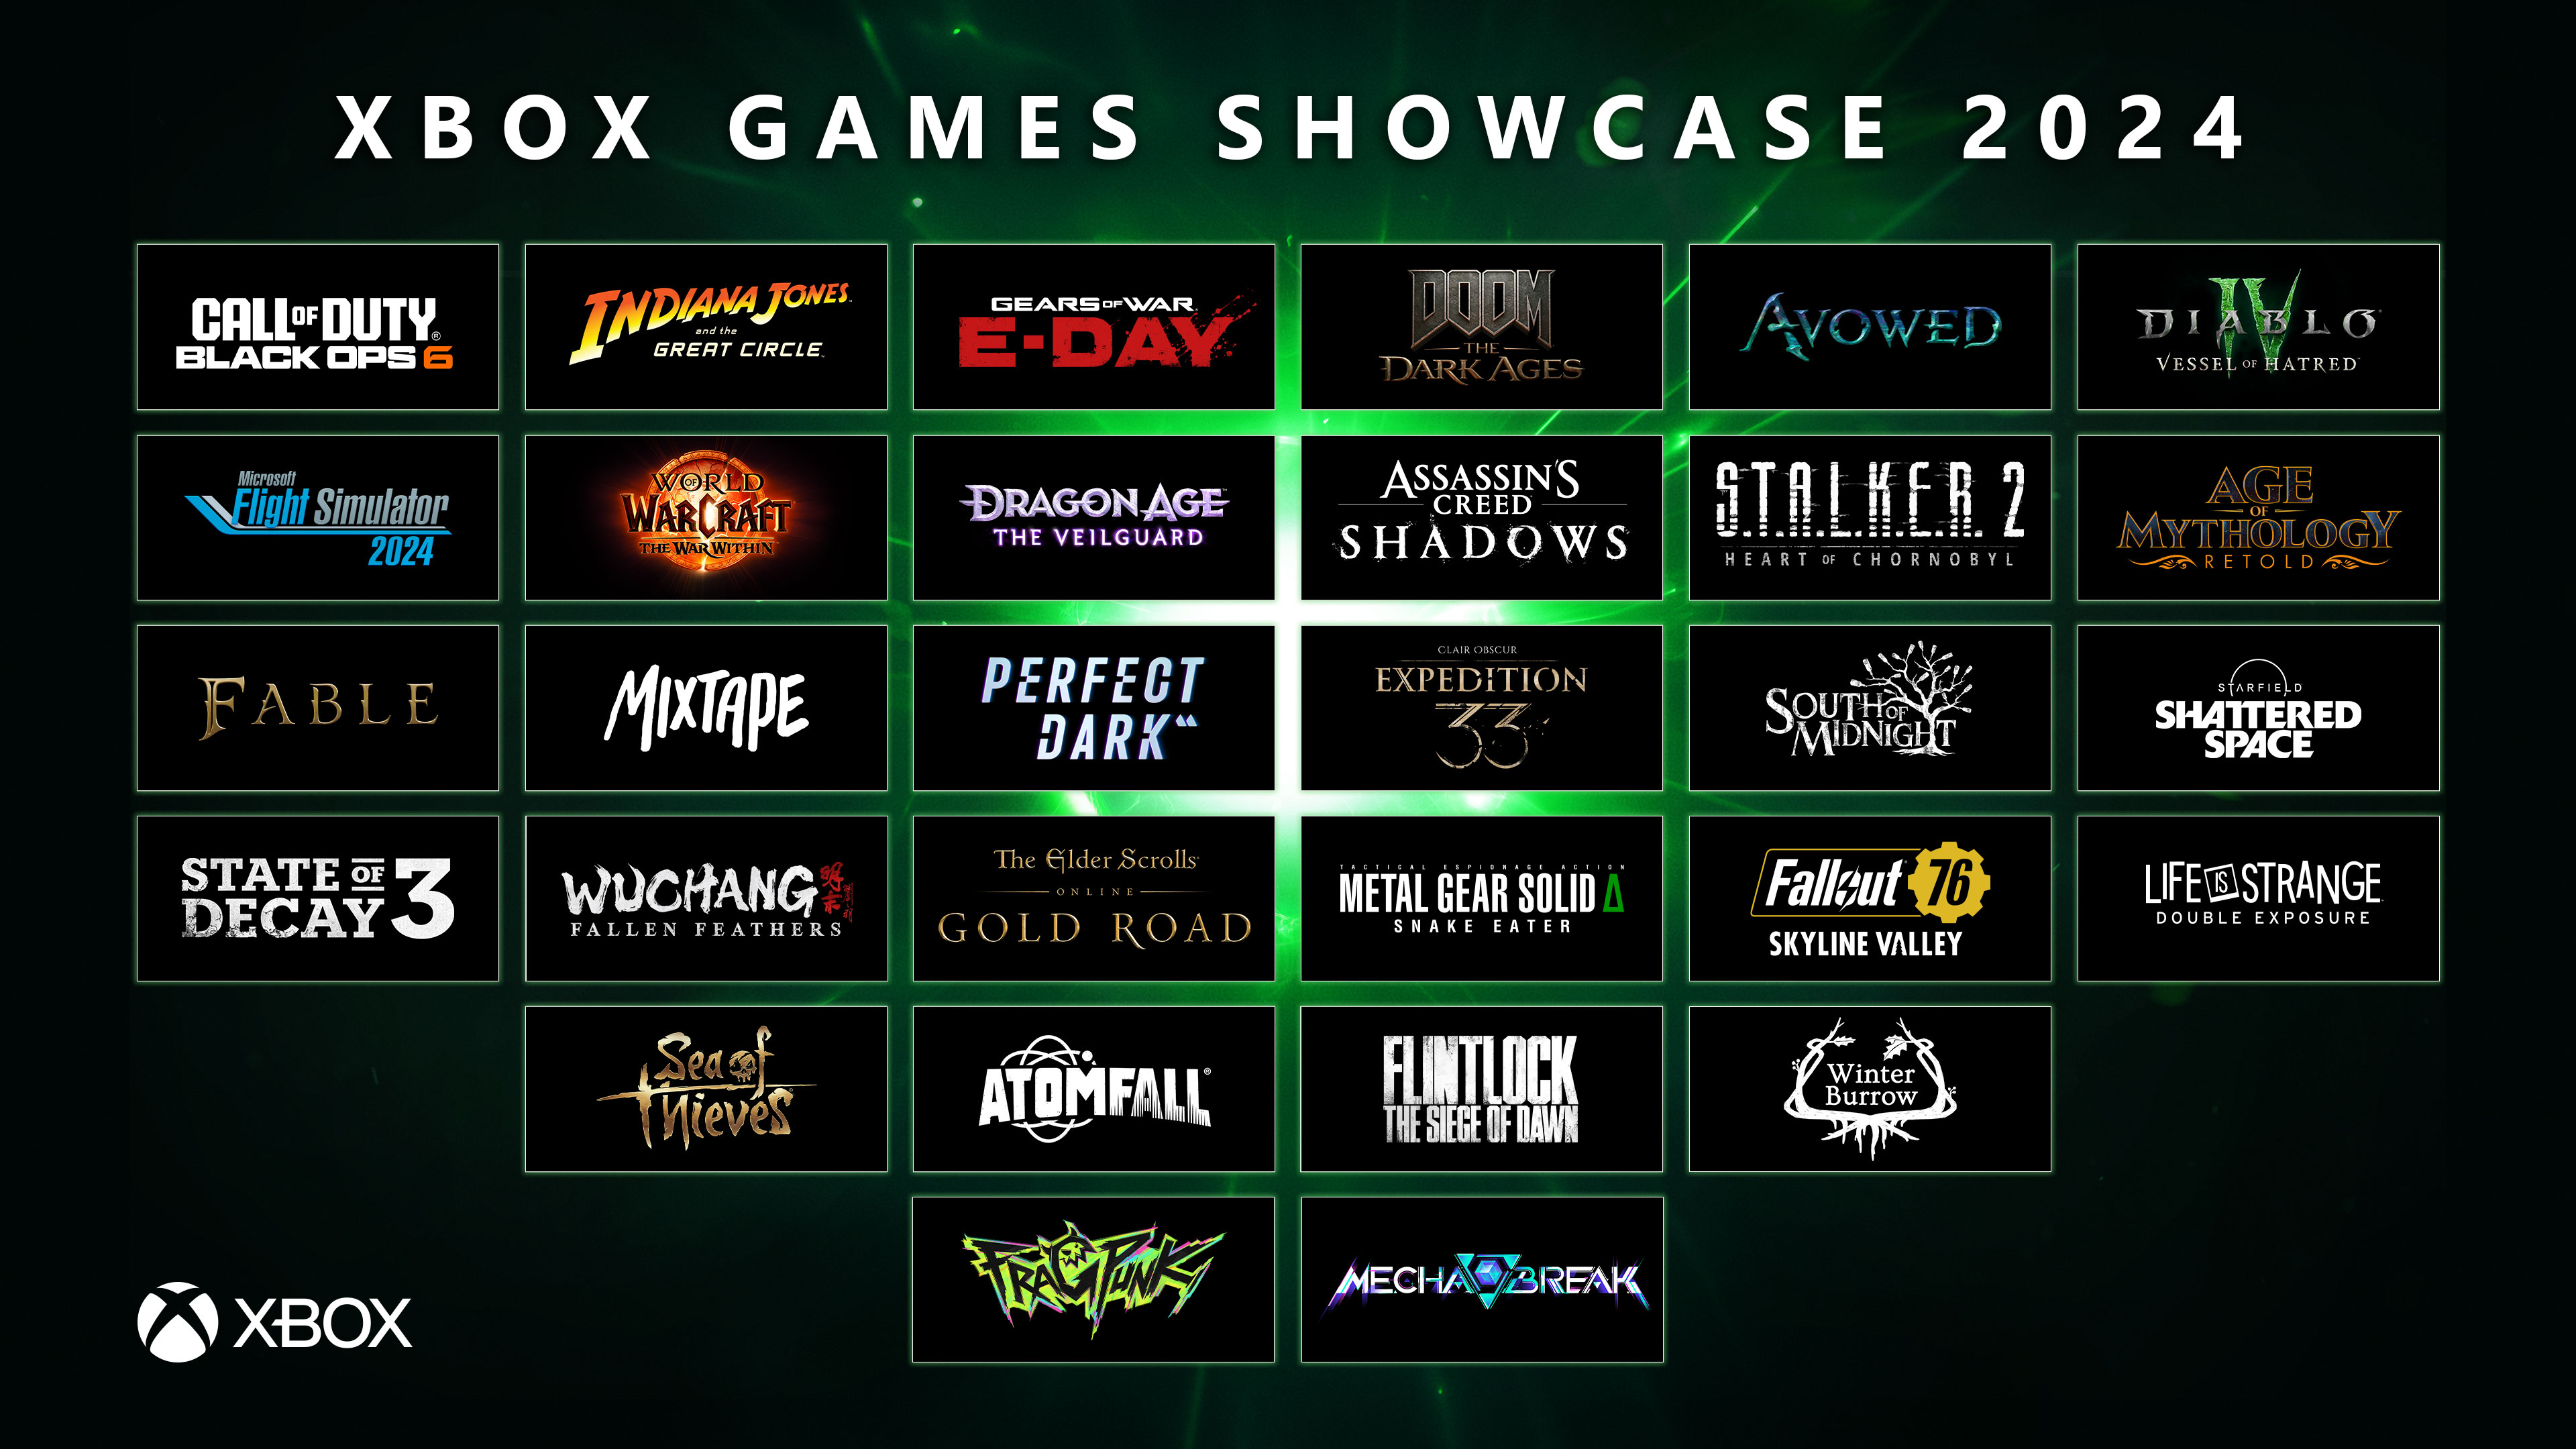 The games shown at the 2024 showcase